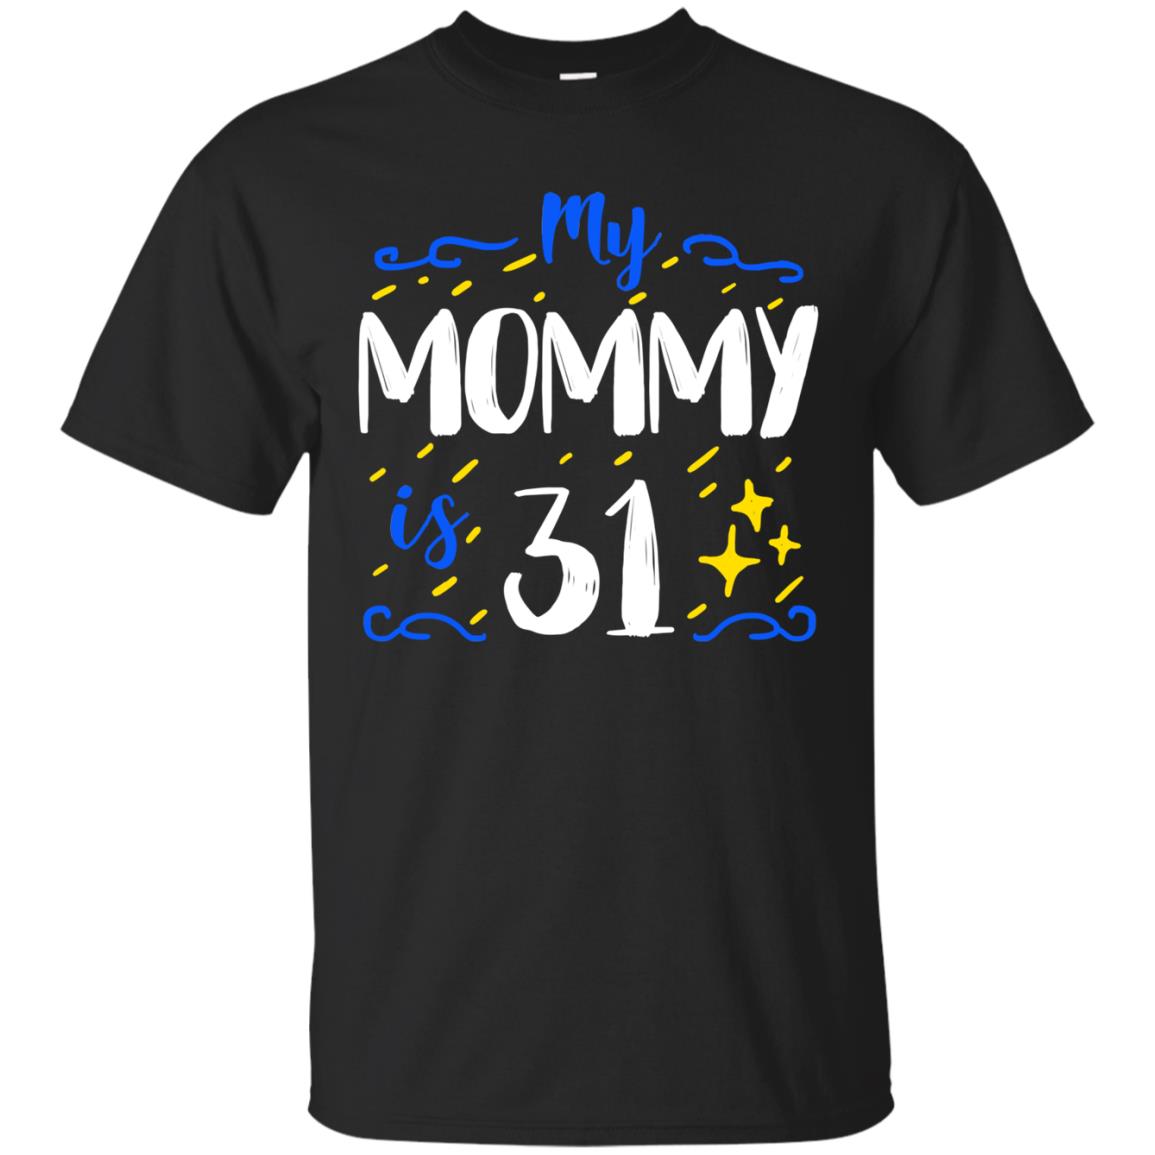 My Mommy Is 31 31st Birthday Mommy Shirt For Sons Or DaughtersG200 Gildan Ultra Cotton T-Shirt